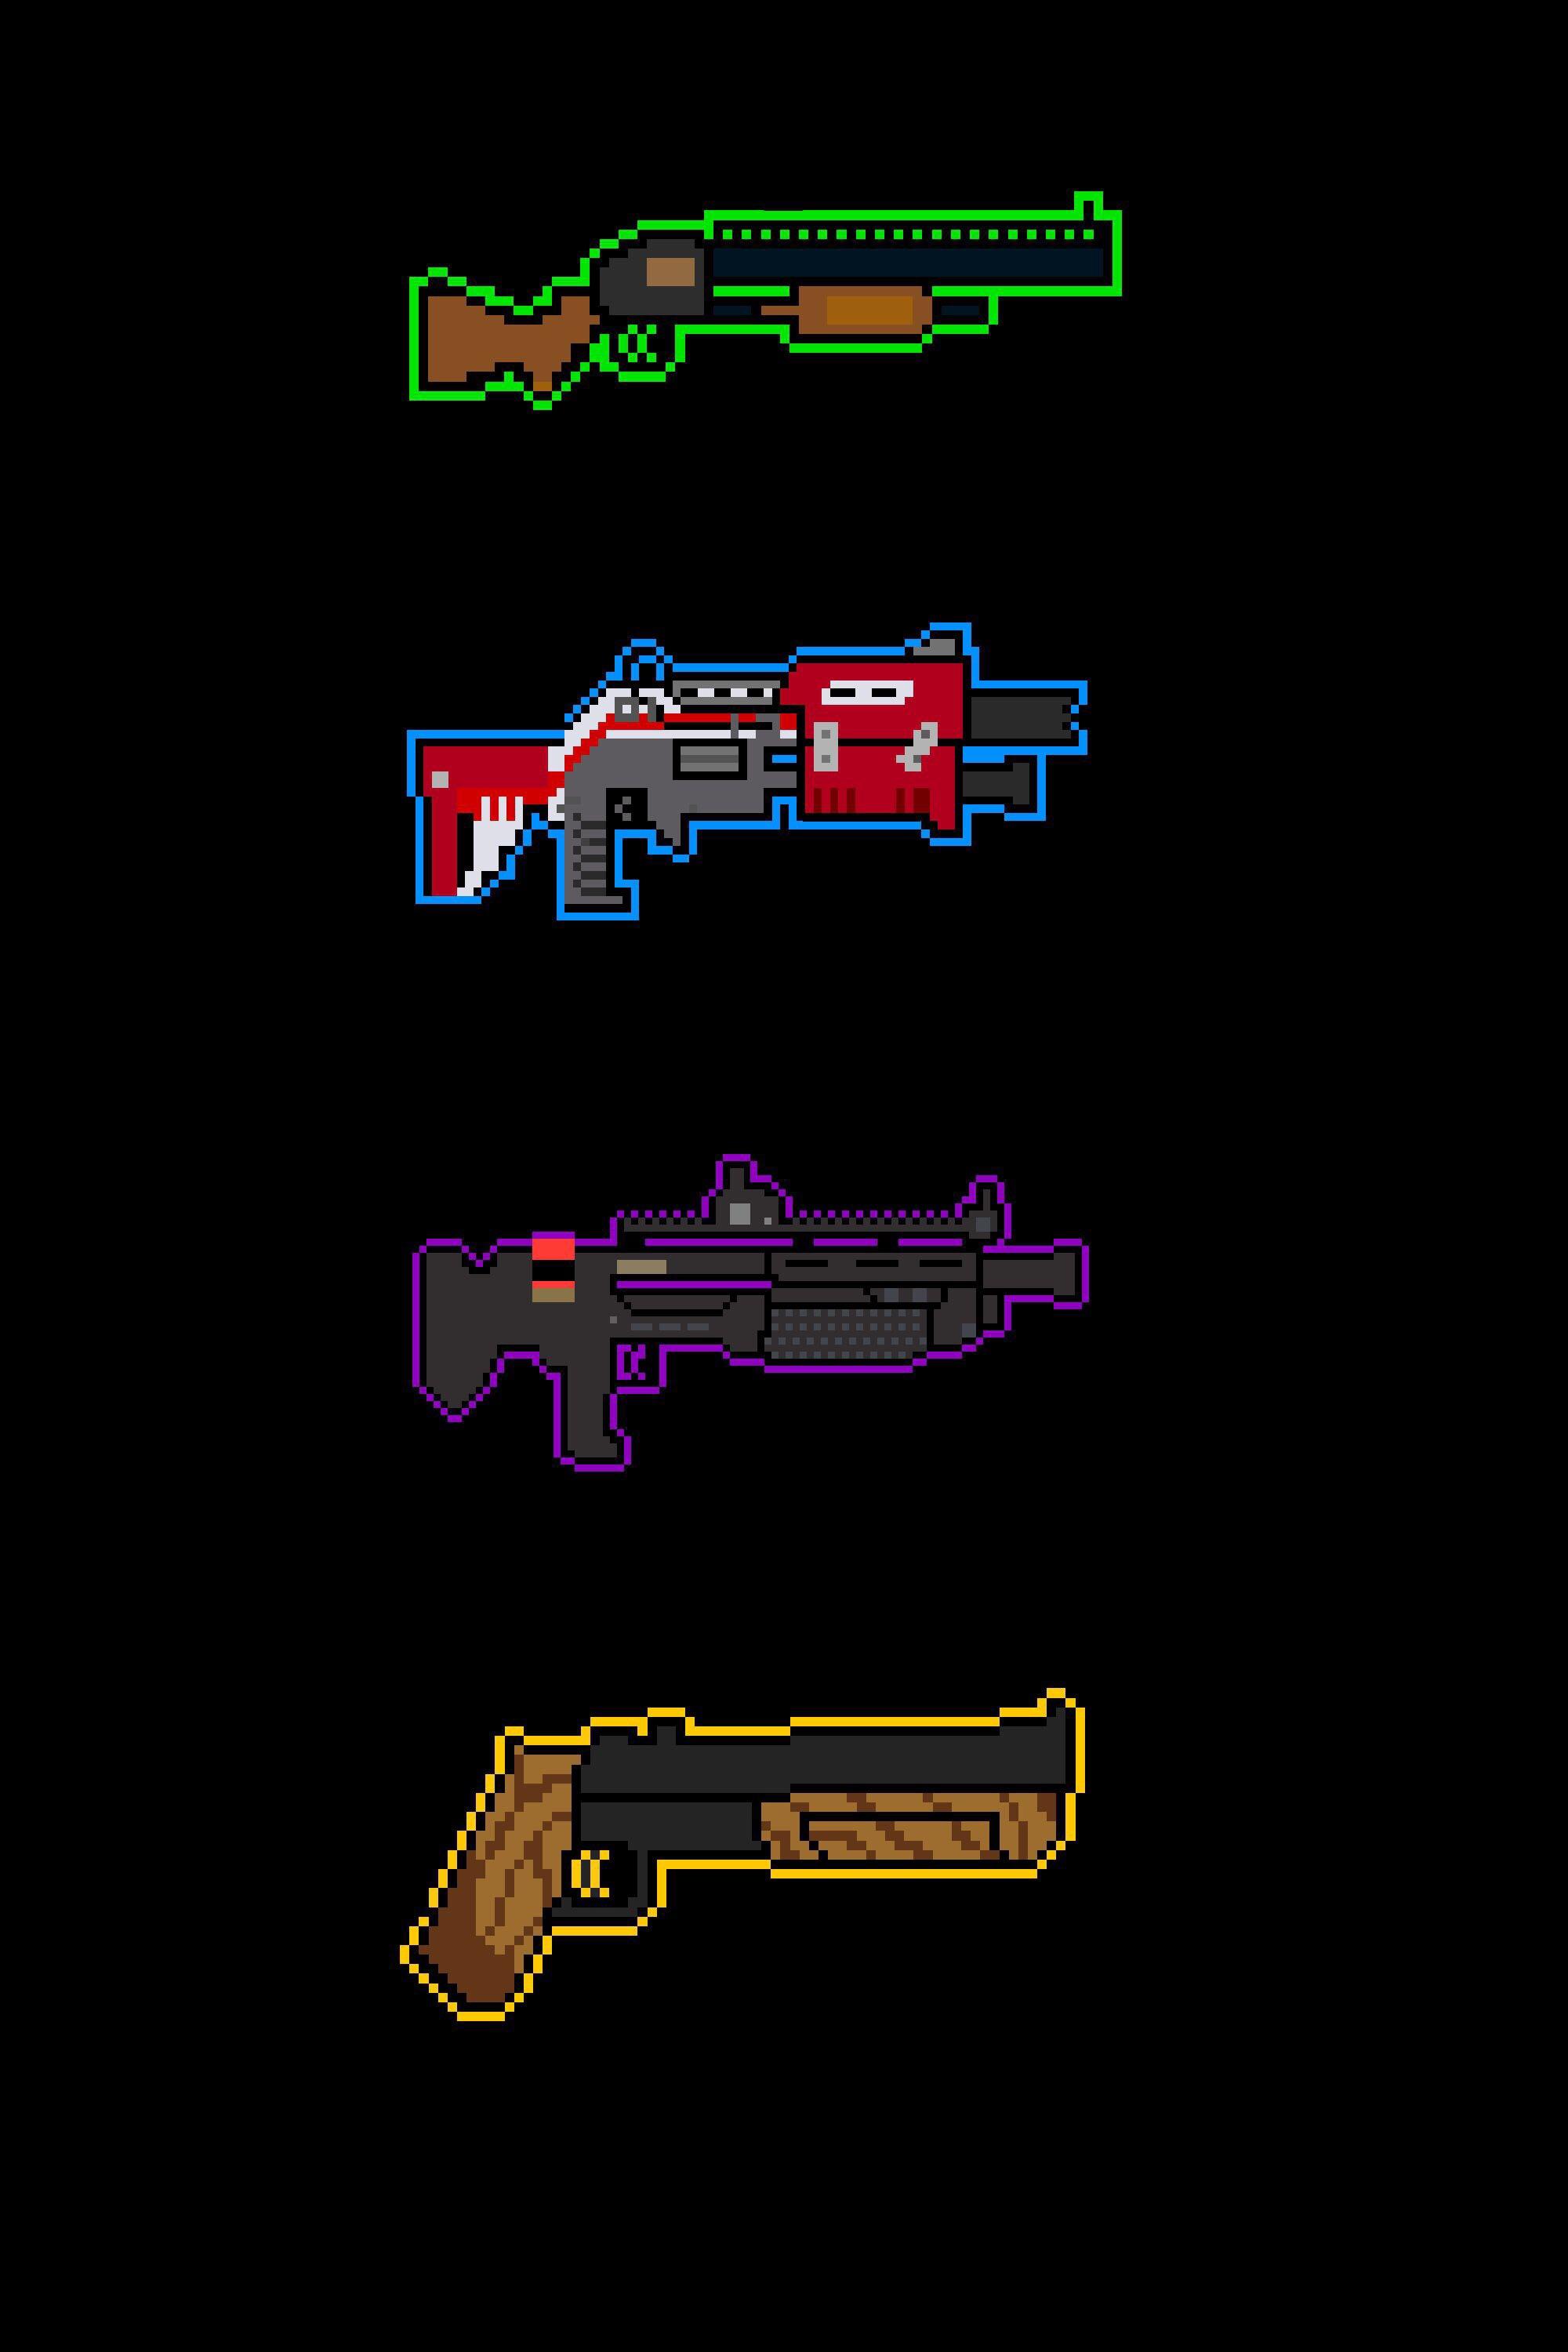 Another wallpaper with all the shotguns. PM me if you need an iPhone